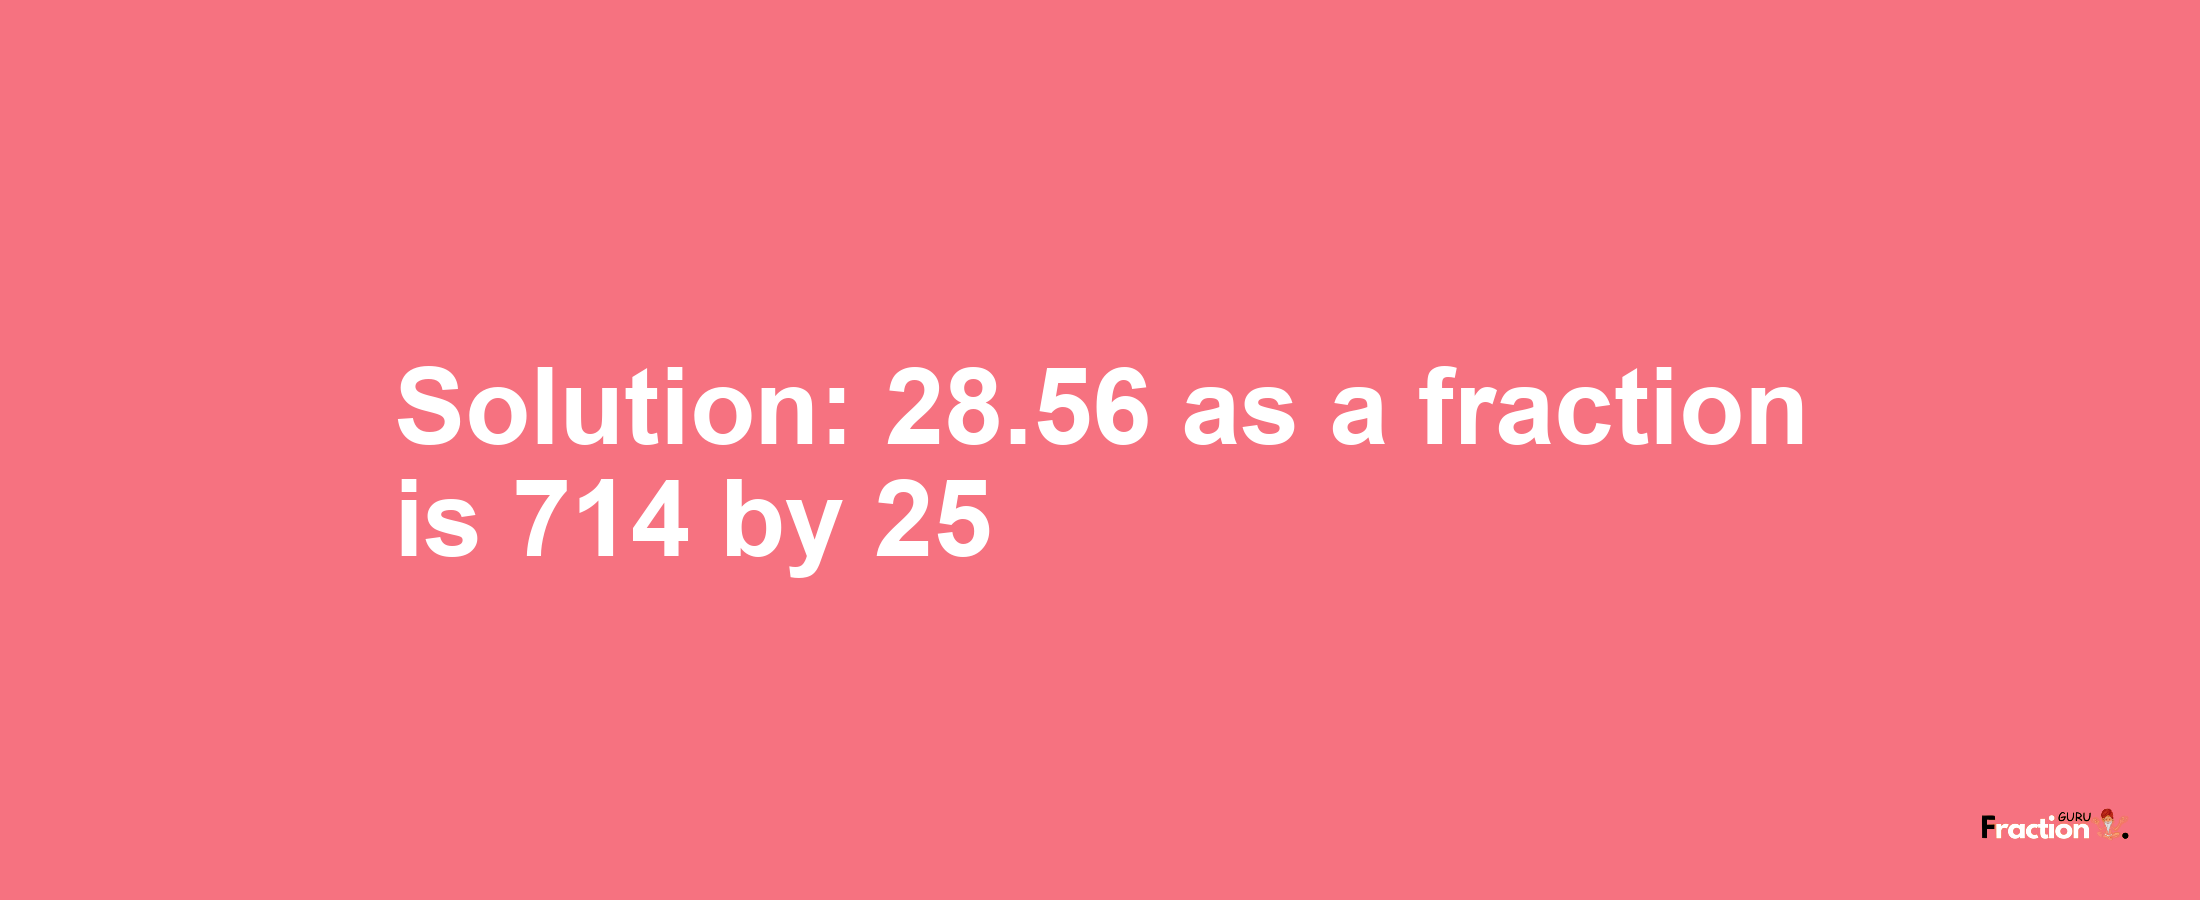 Solution:28.56 as a fraction is 714/25